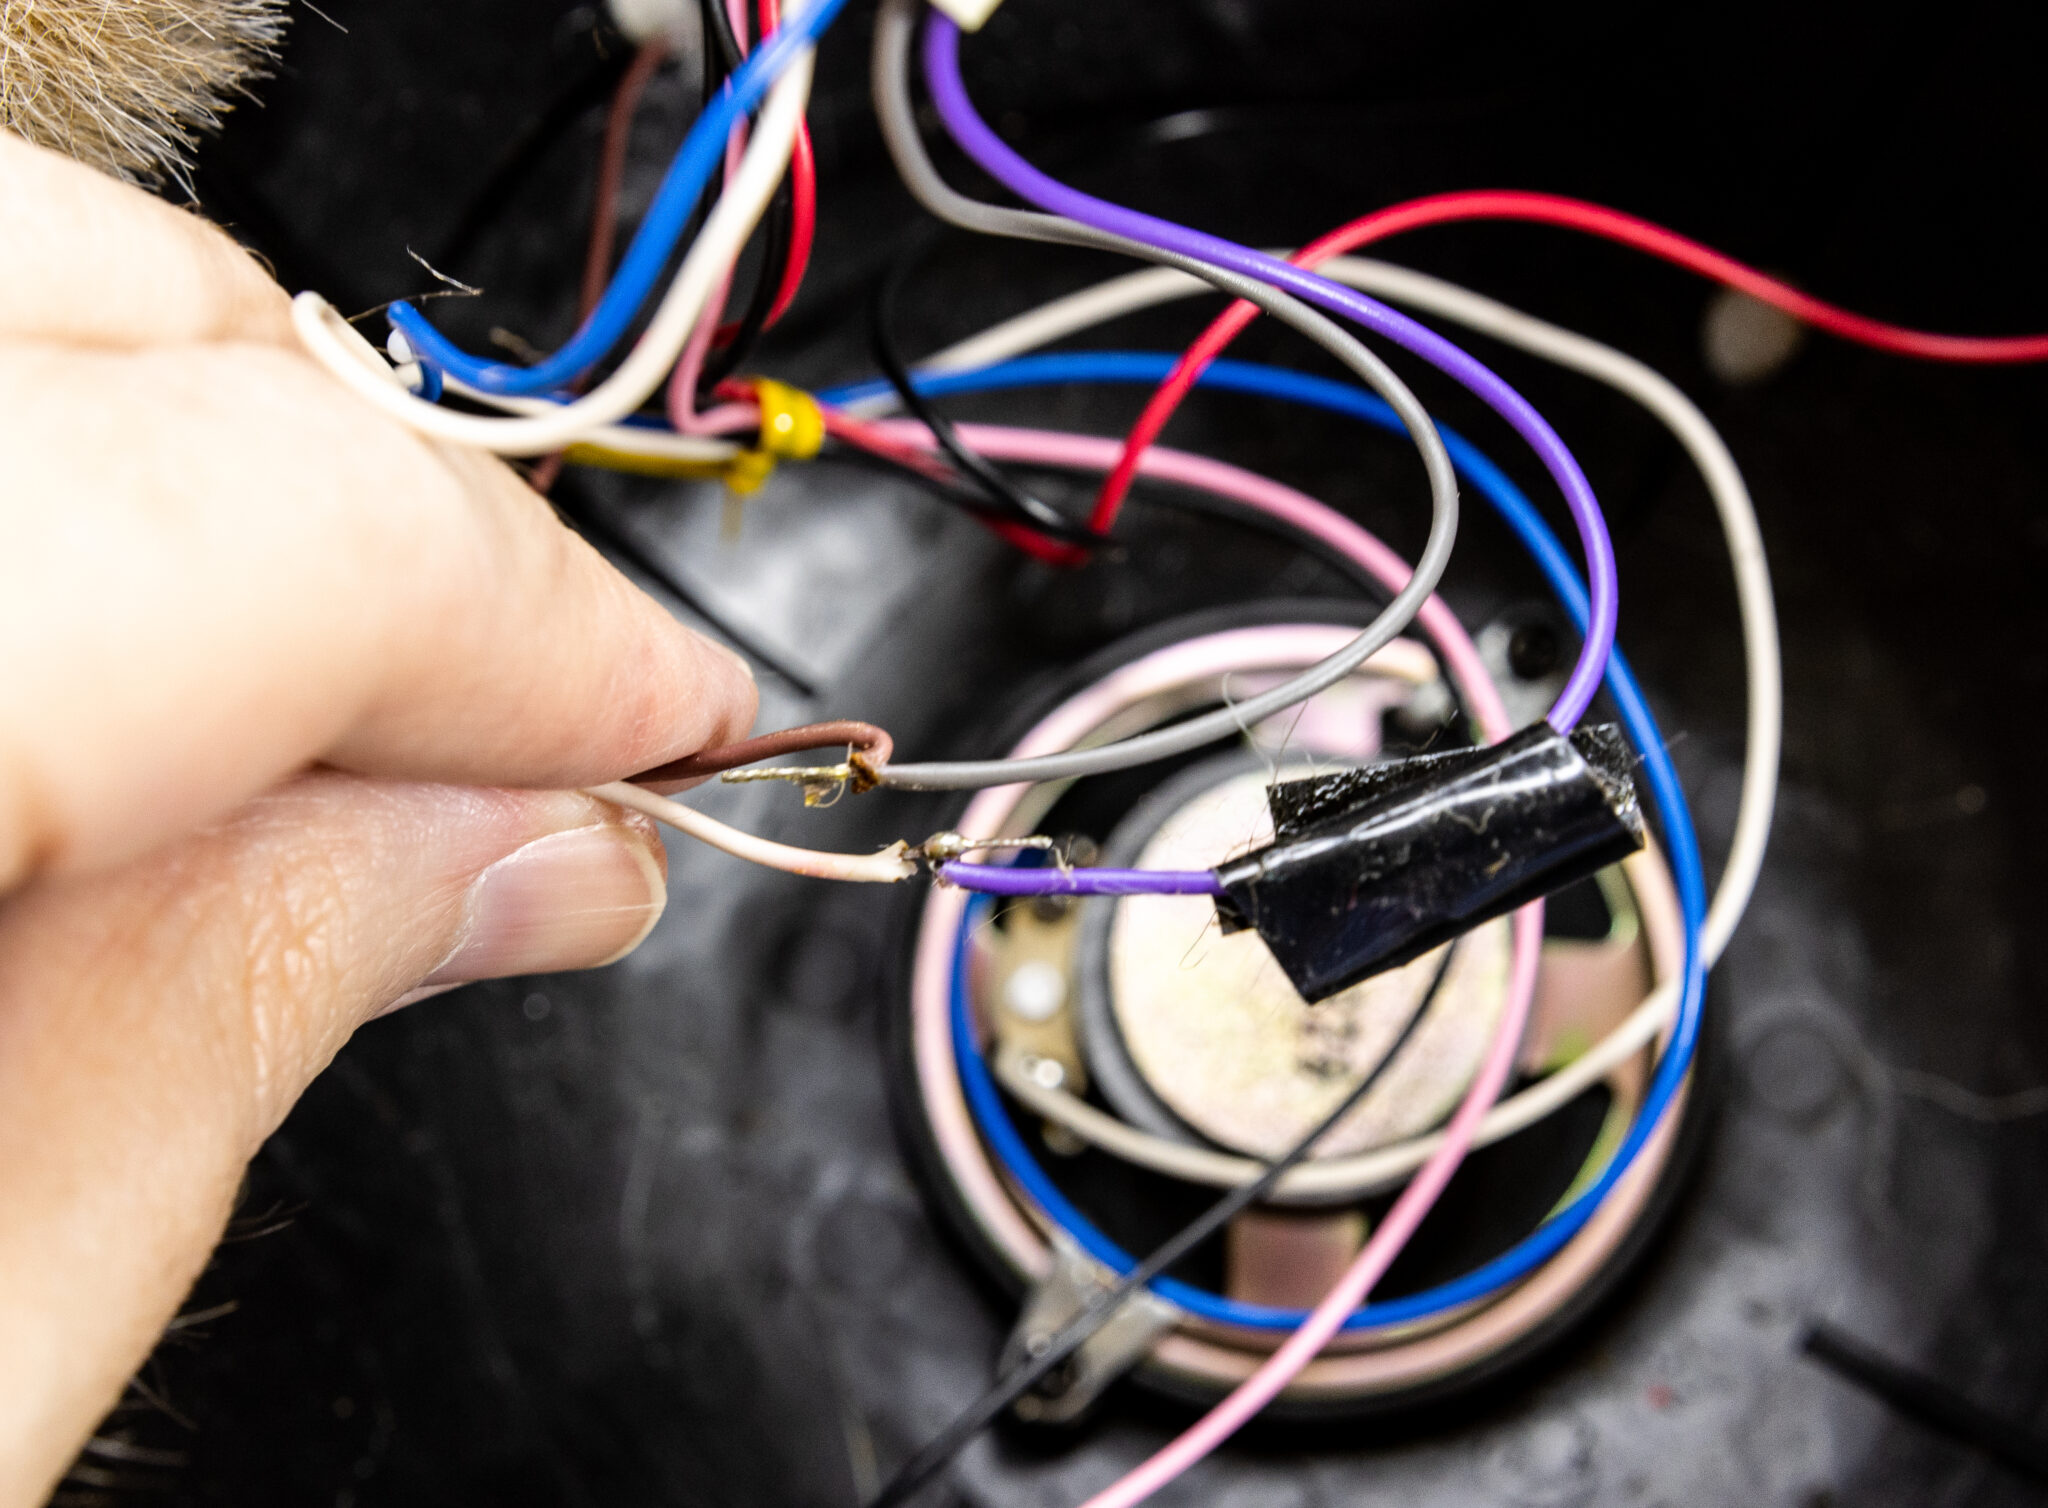 A photo of hand soldered wires